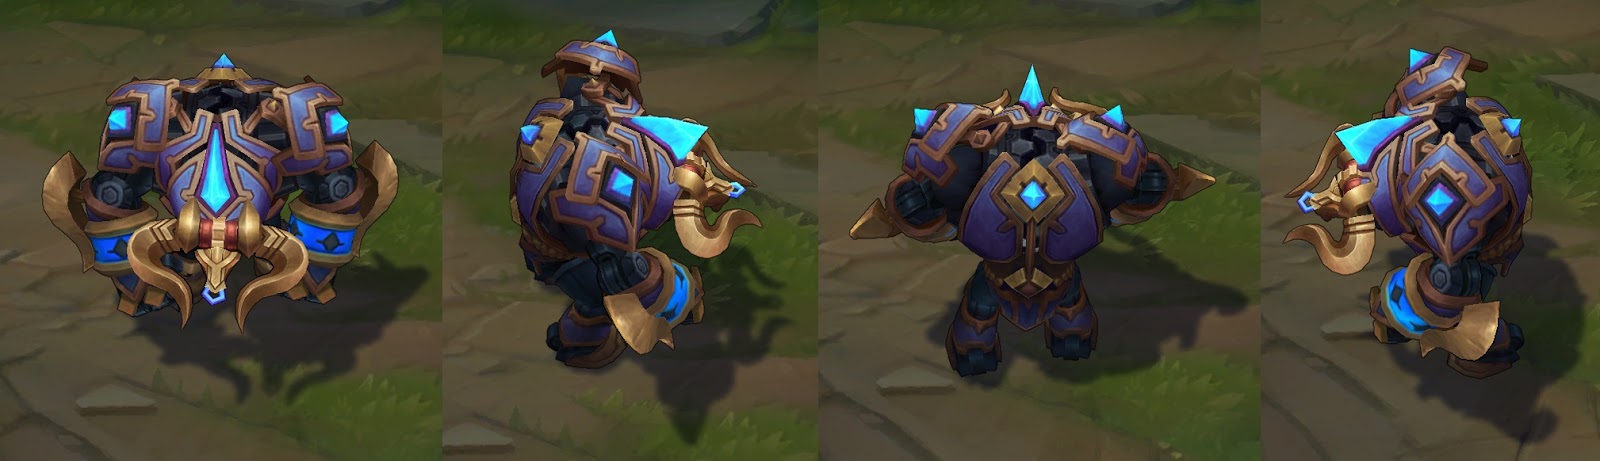 hextech alistar skin for league of legends ingame picture